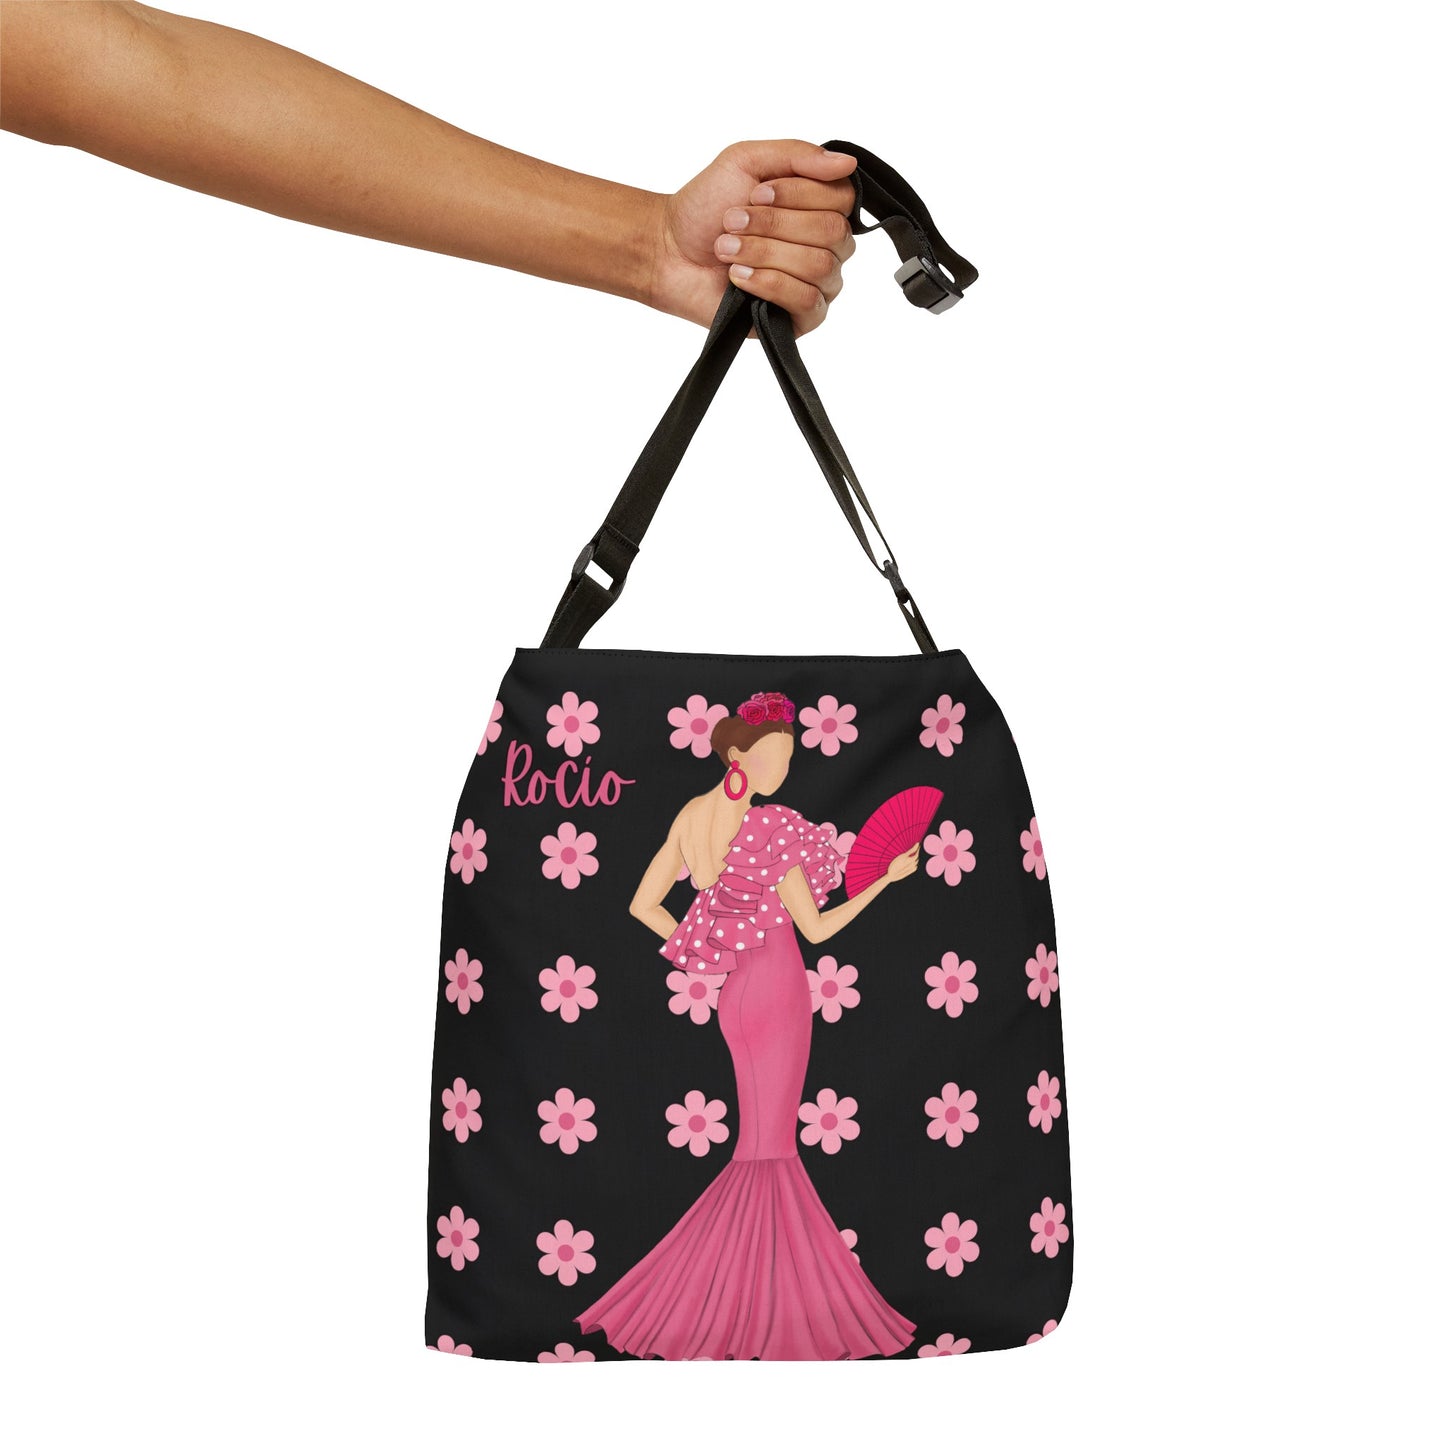 a hand holding a black and pink purse